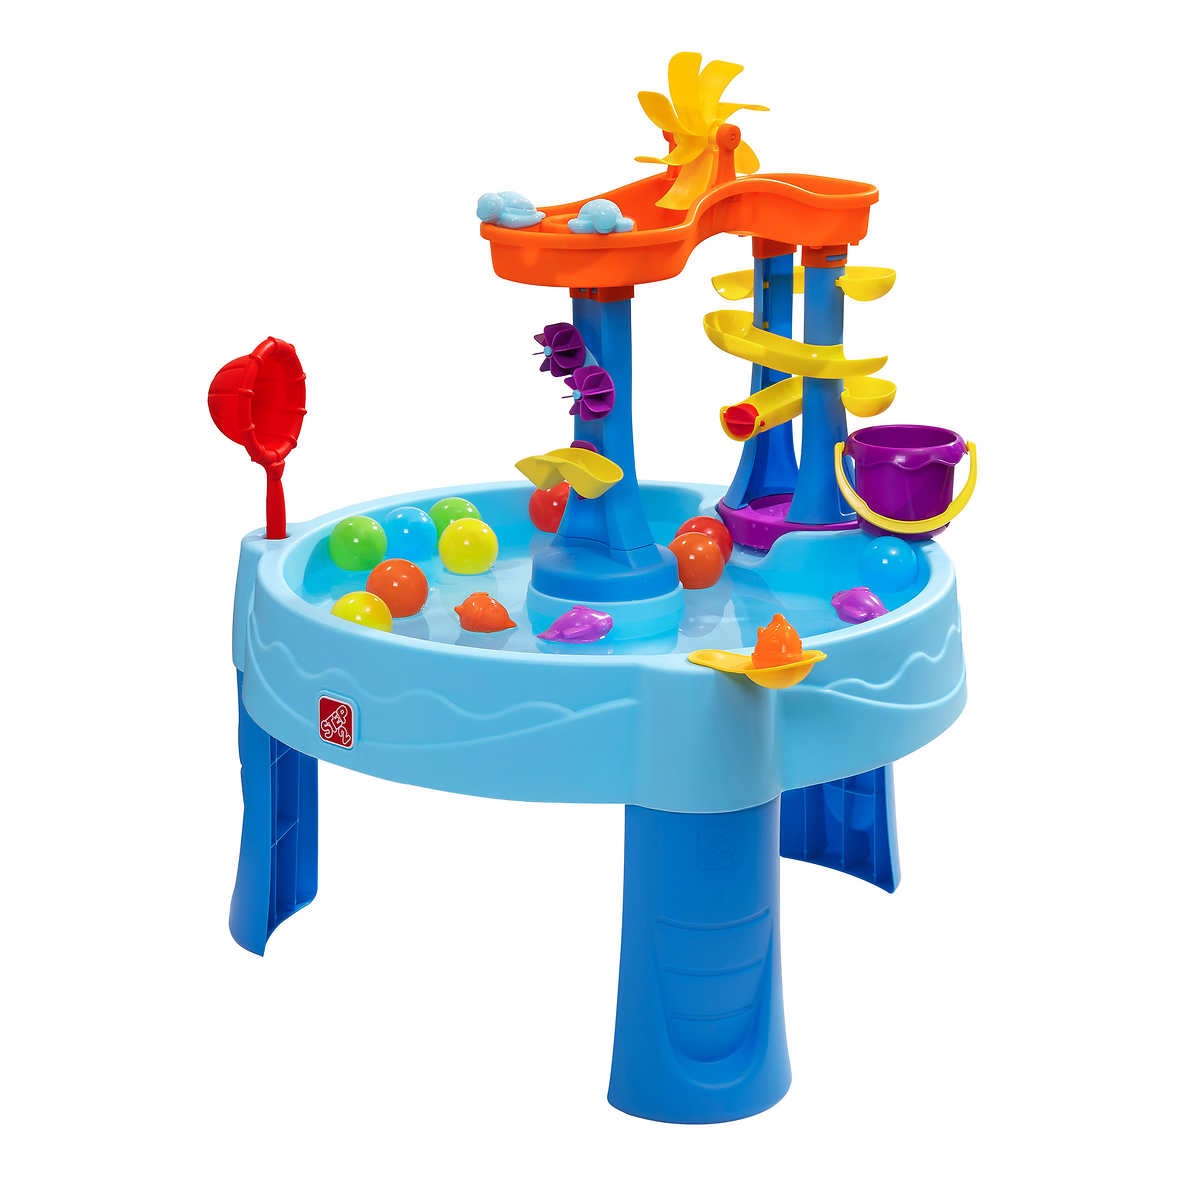 Step2 Rushing Rapids Water Table | Costco